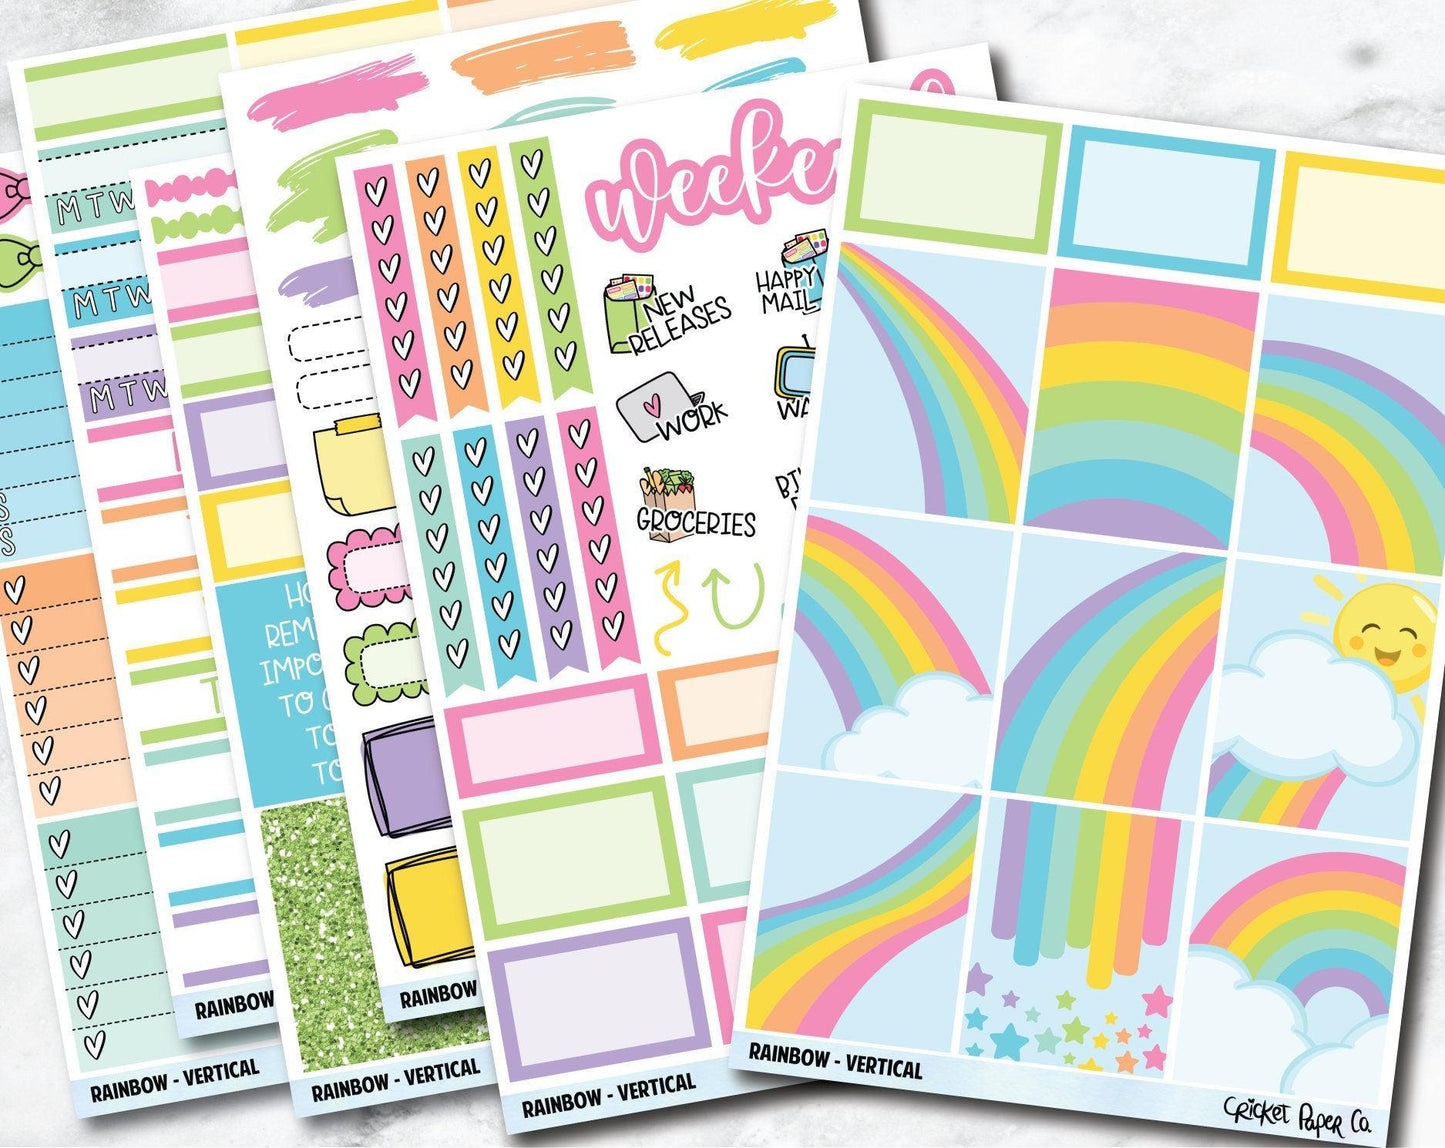 RAINBOW Planner Stickers - Full Kit-Cricket Paper Co.